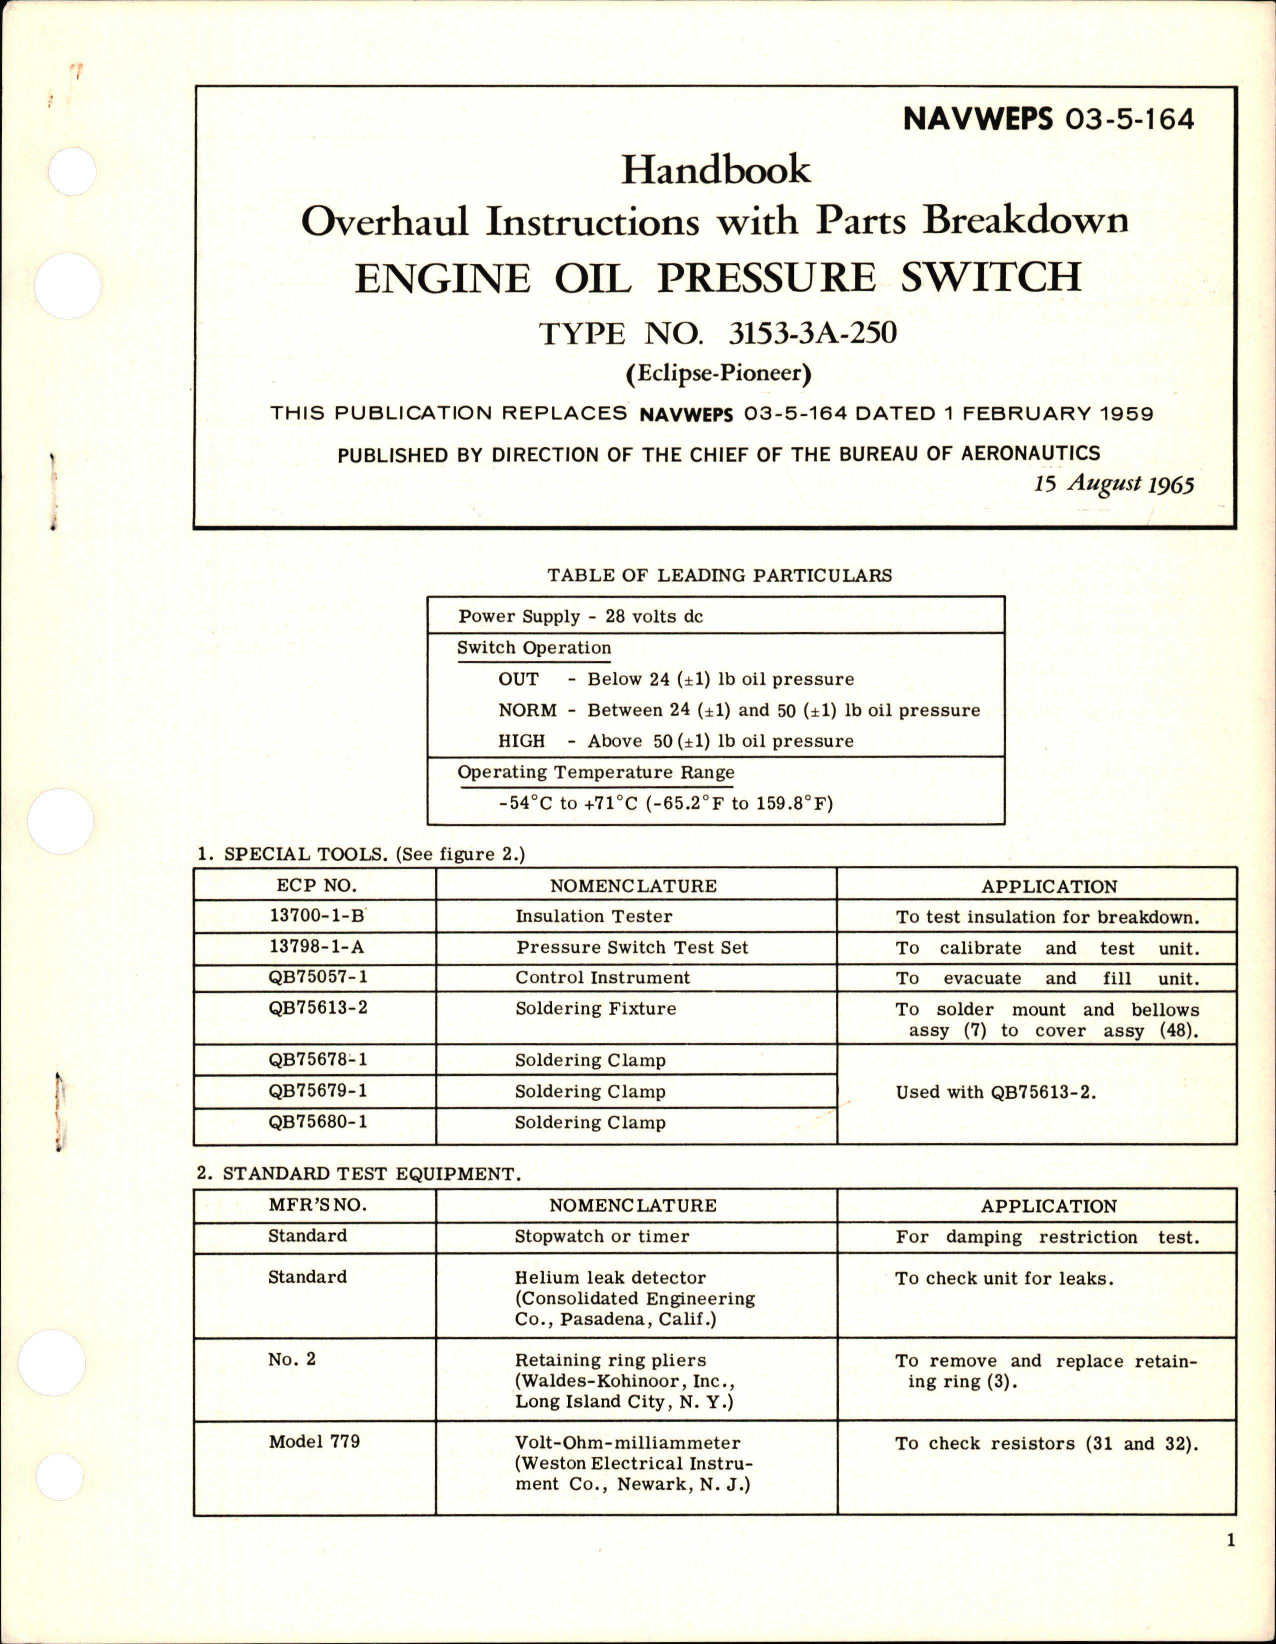 Sample page 1 from AirCorps Library document: Overhaul Instructions with Parts Breakdown for Engine Oil Pressure Switch - Type 3153-3A-250